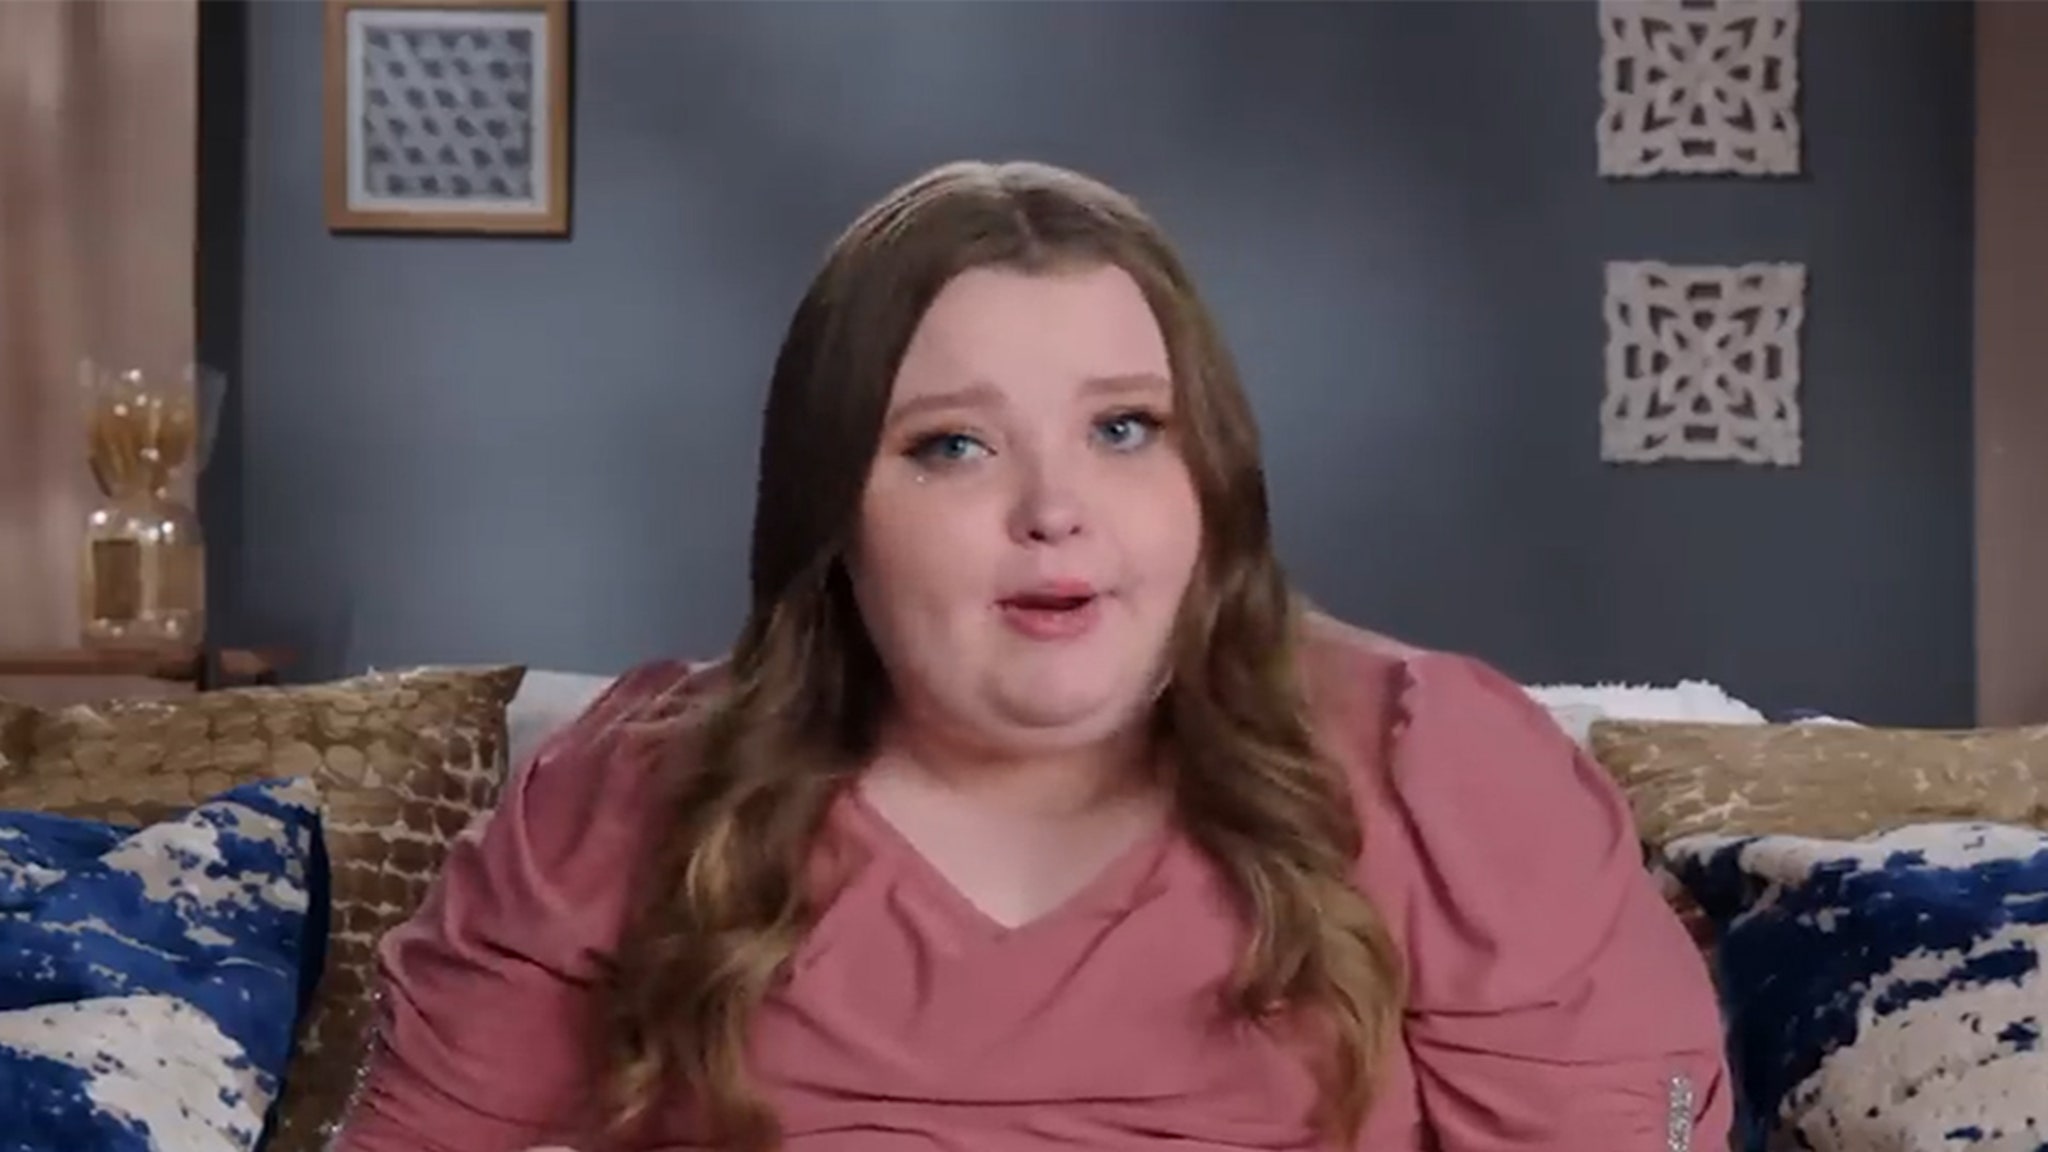 Honey Boo Boo says she will fire Mama June if she doesn't pay her back